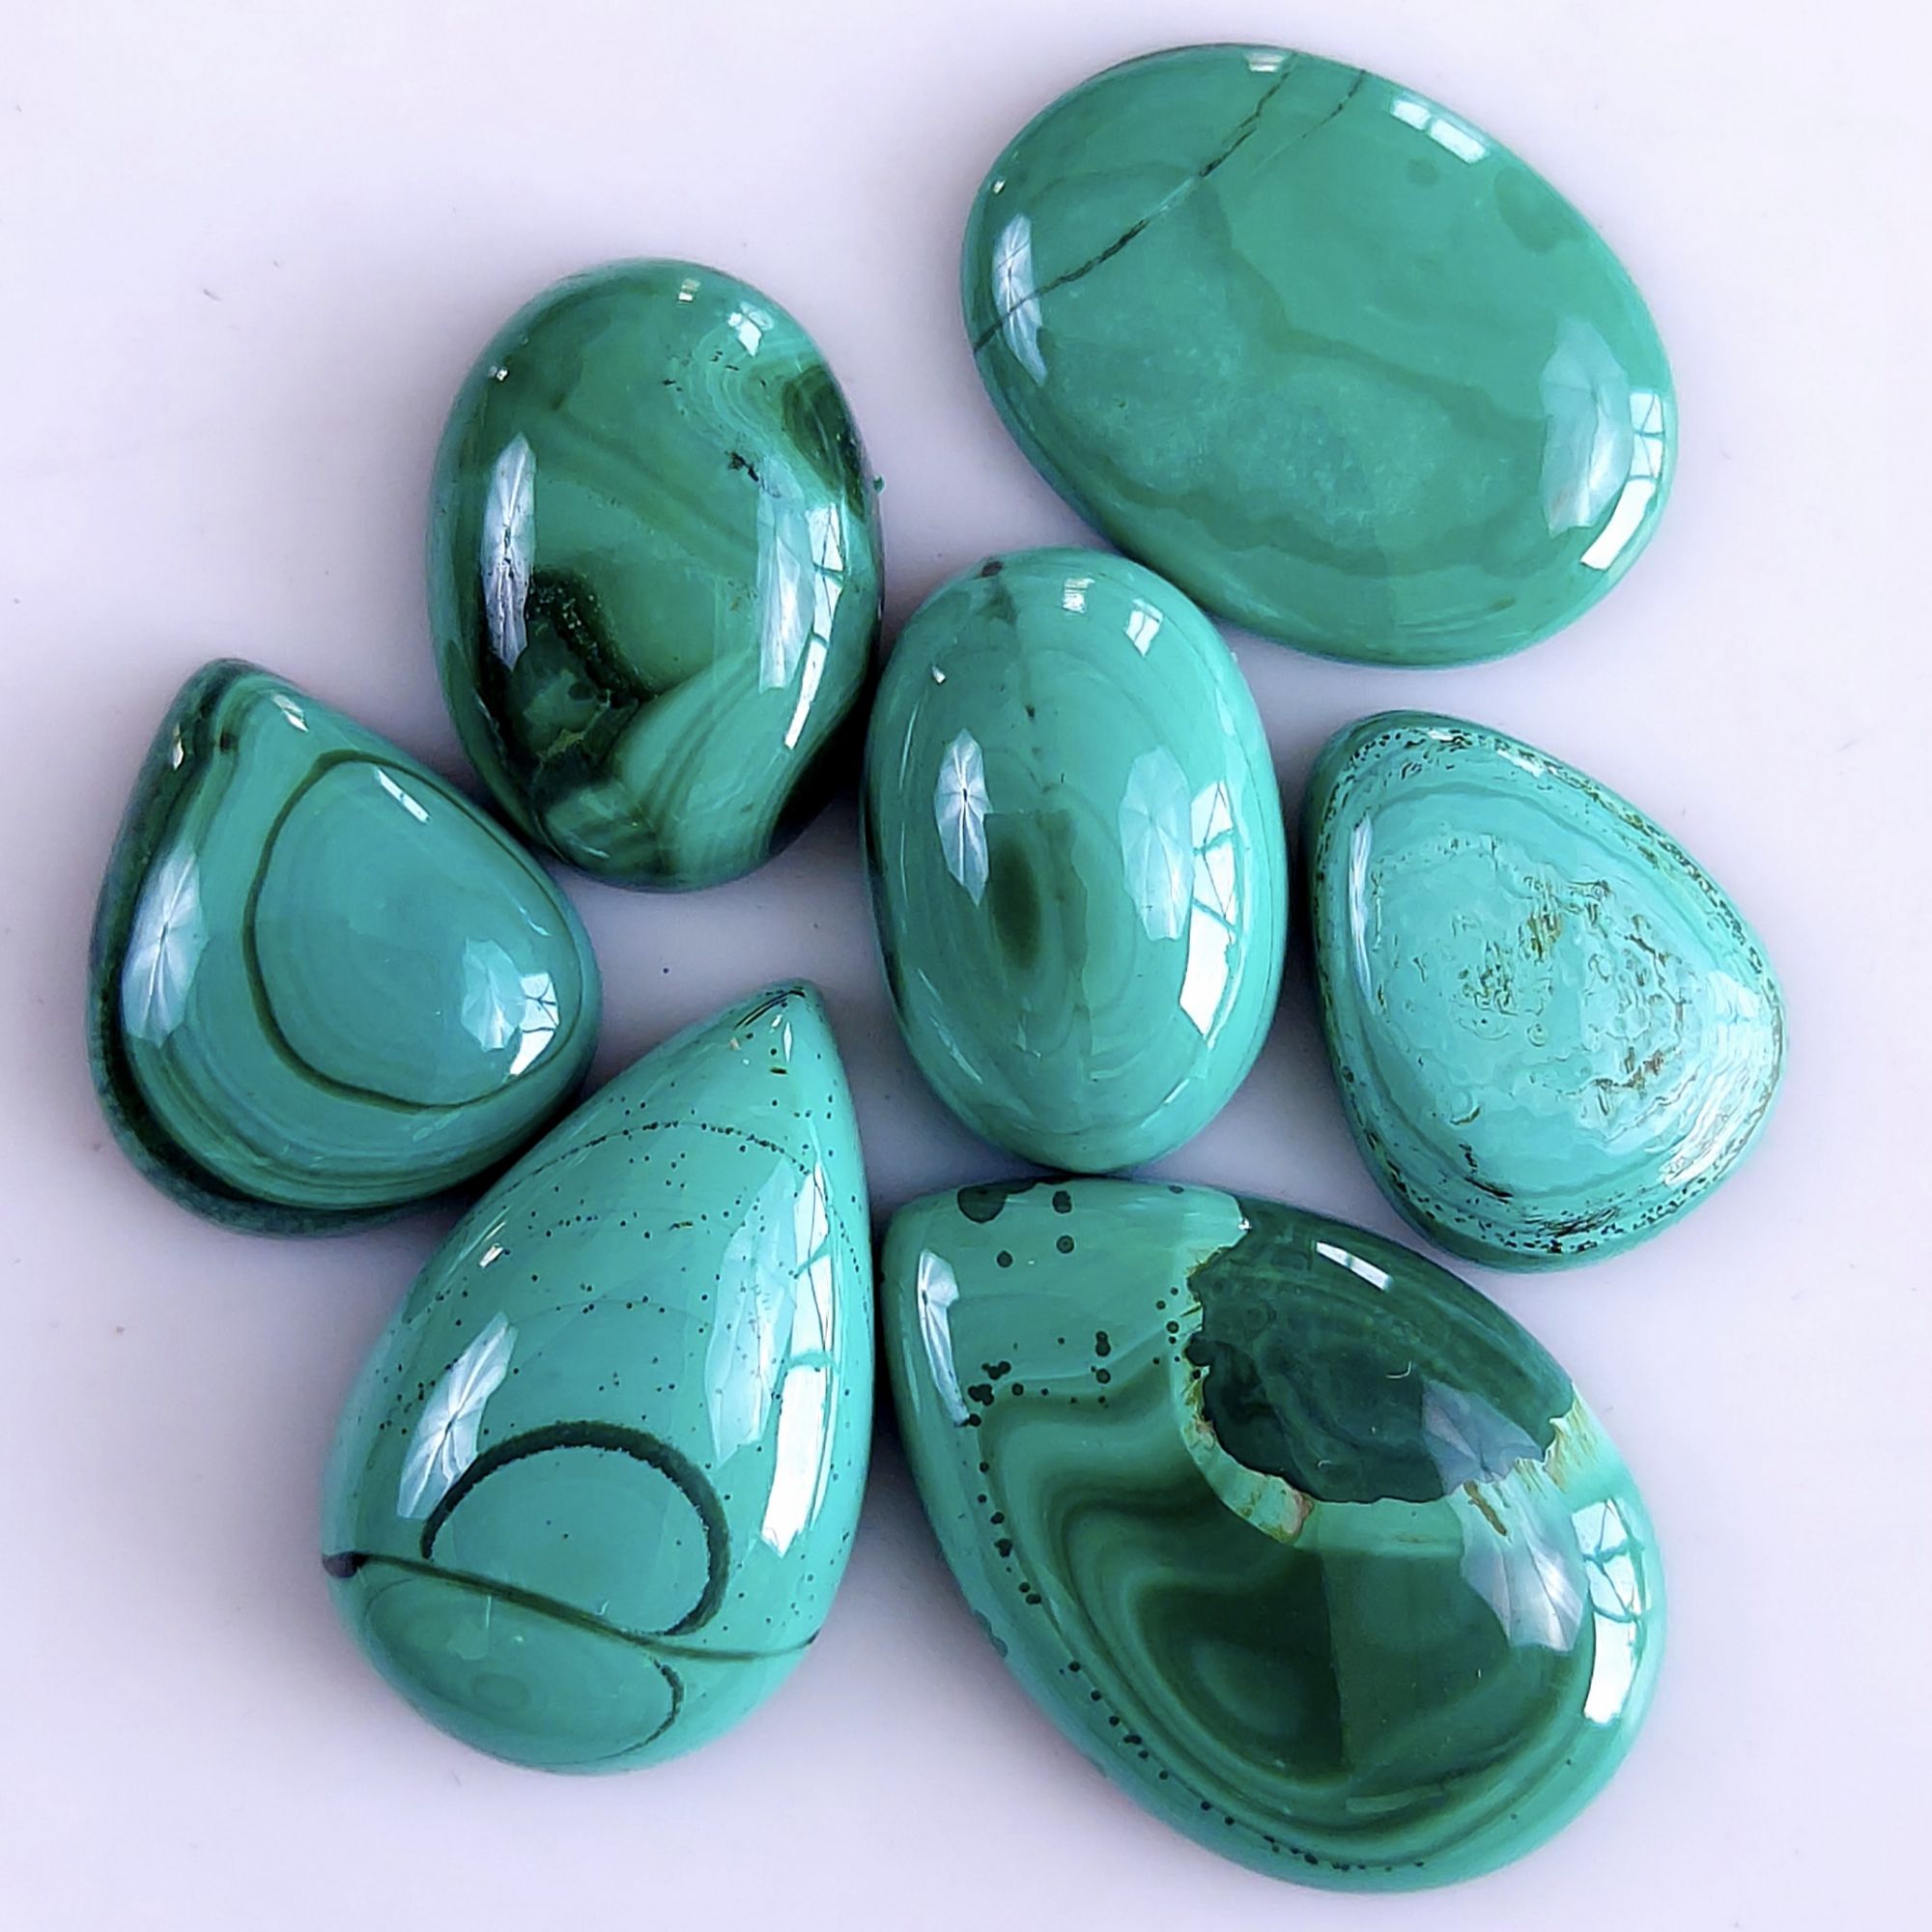 7Pcs 115Cts Natural Green Malachite Flat Back Loose Cabochon Gemstone For Handmade Jewelry Making and Craft Supplies 20x11 14x10mm#9344